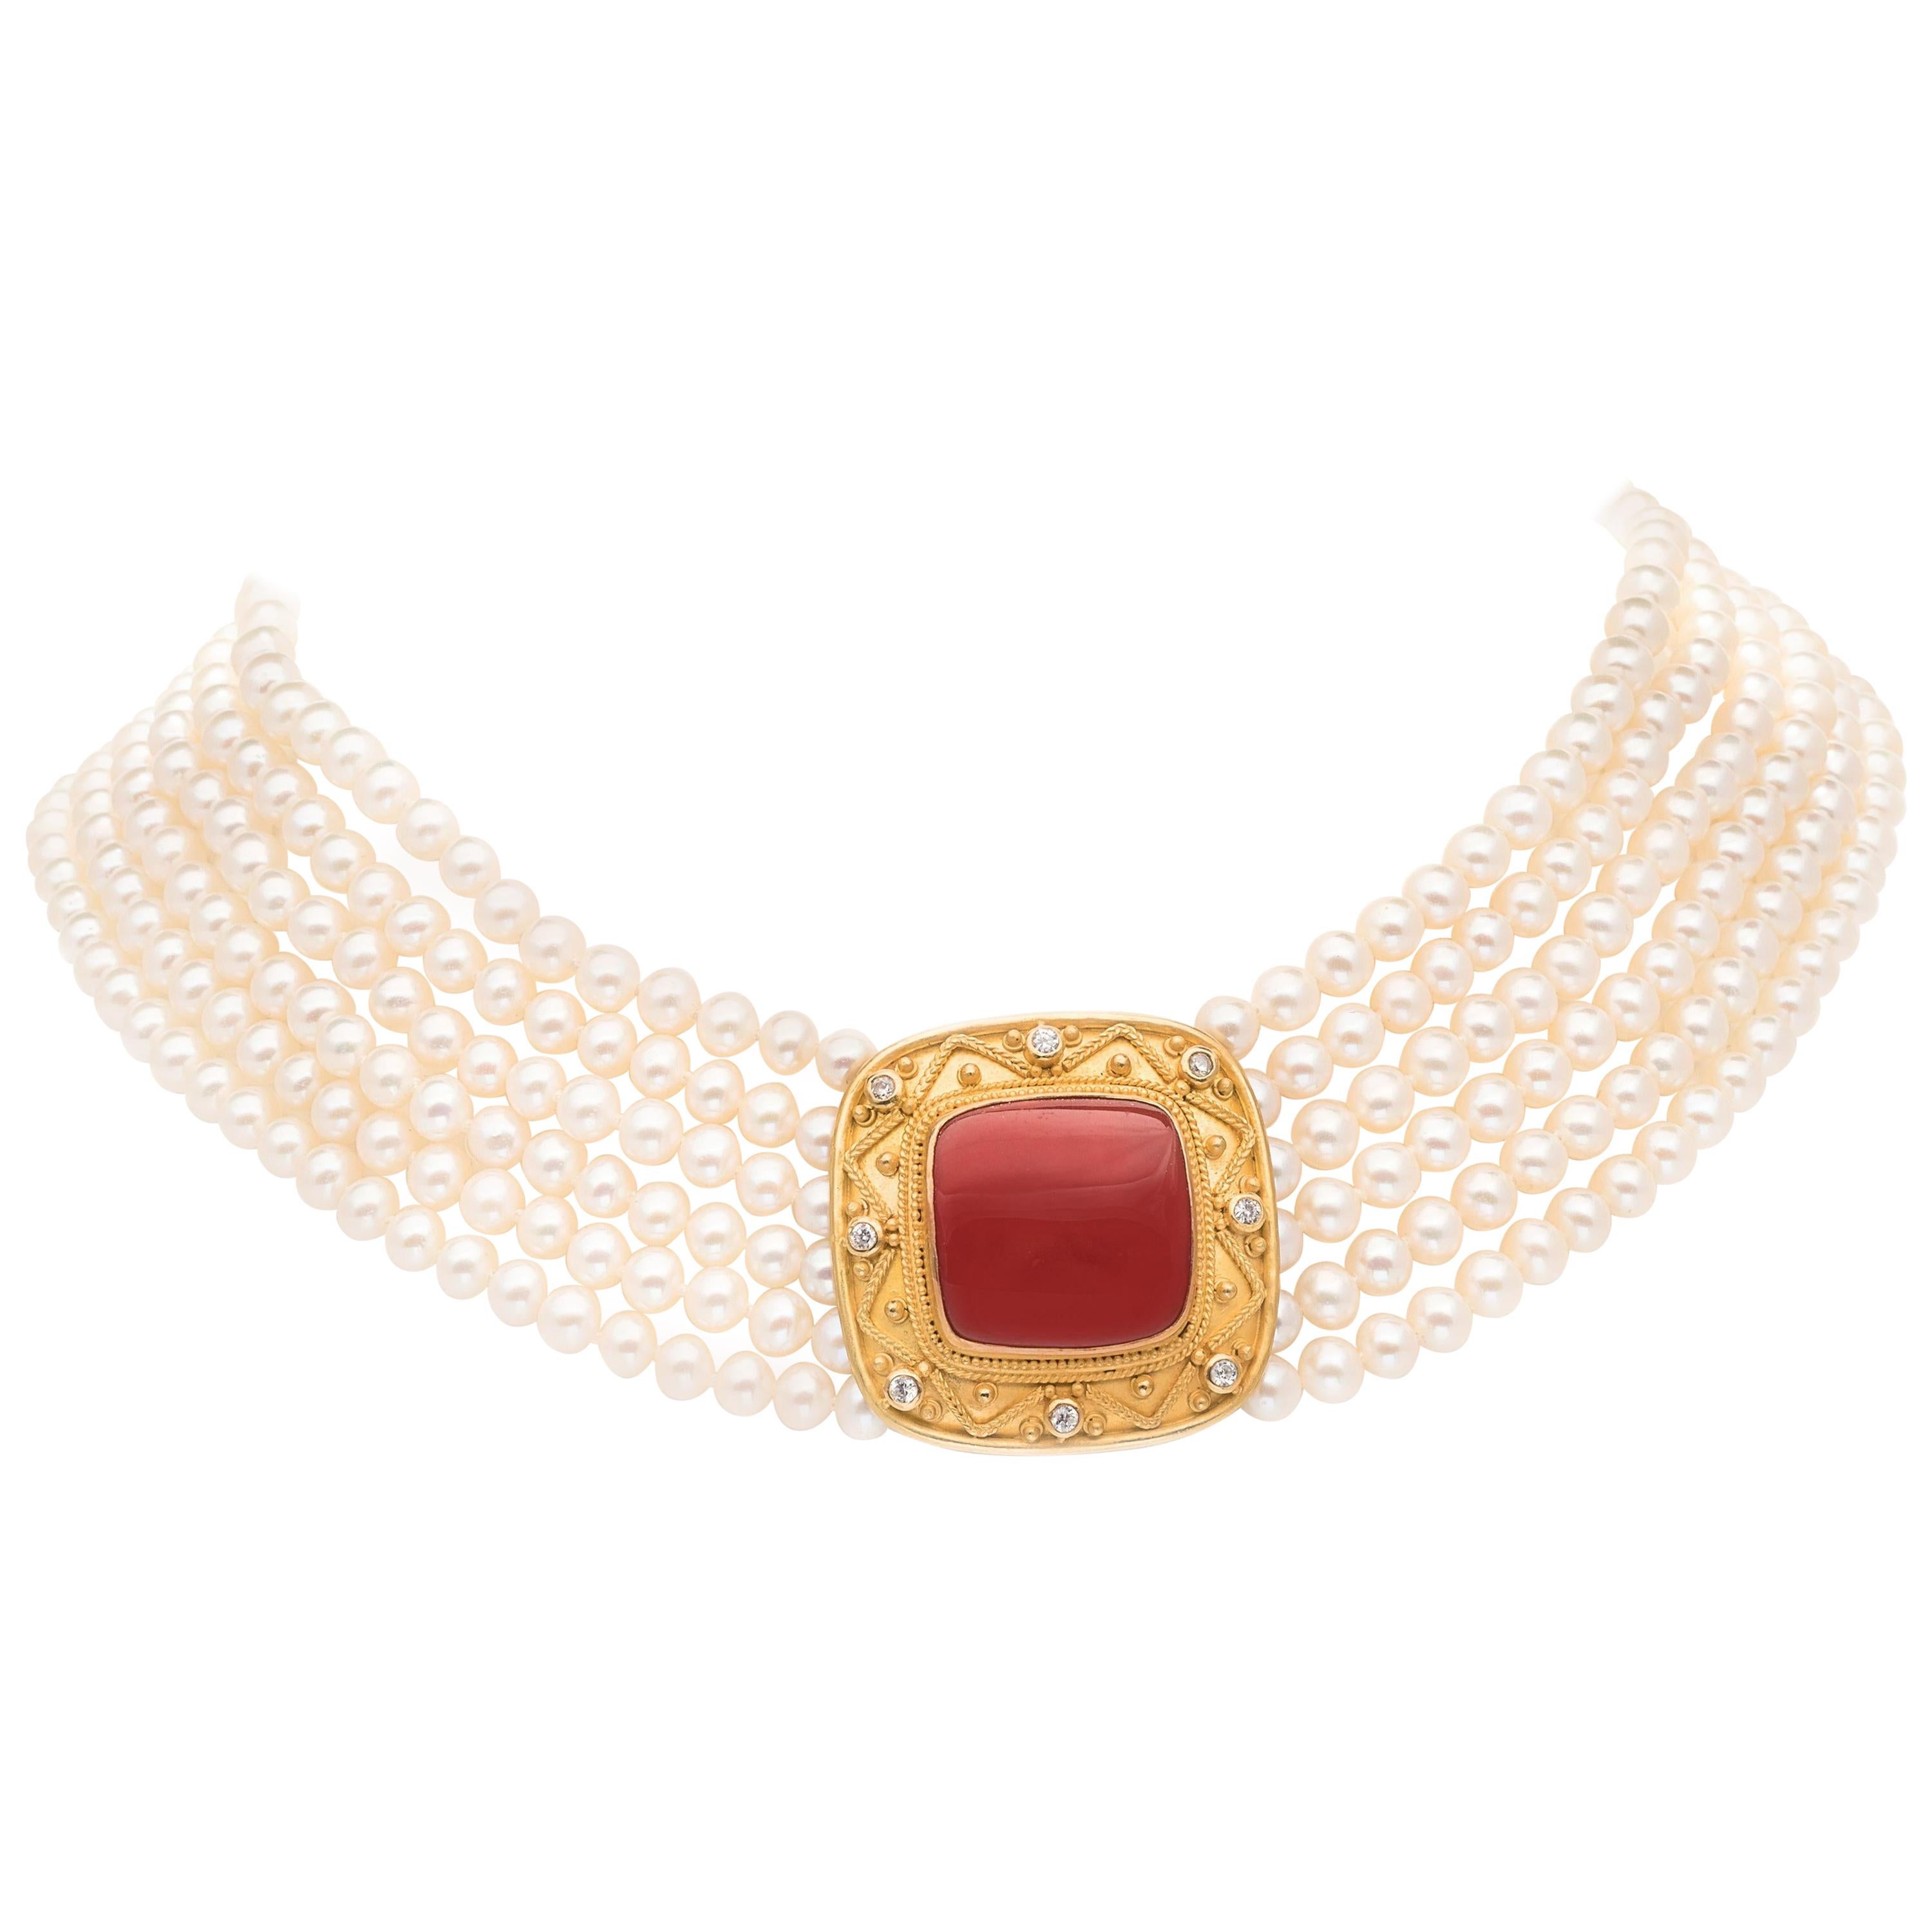 Carolyn Tyler 'Corinna Choker' White Pearl and Red Coral Necklace in 22k Gold For Sale